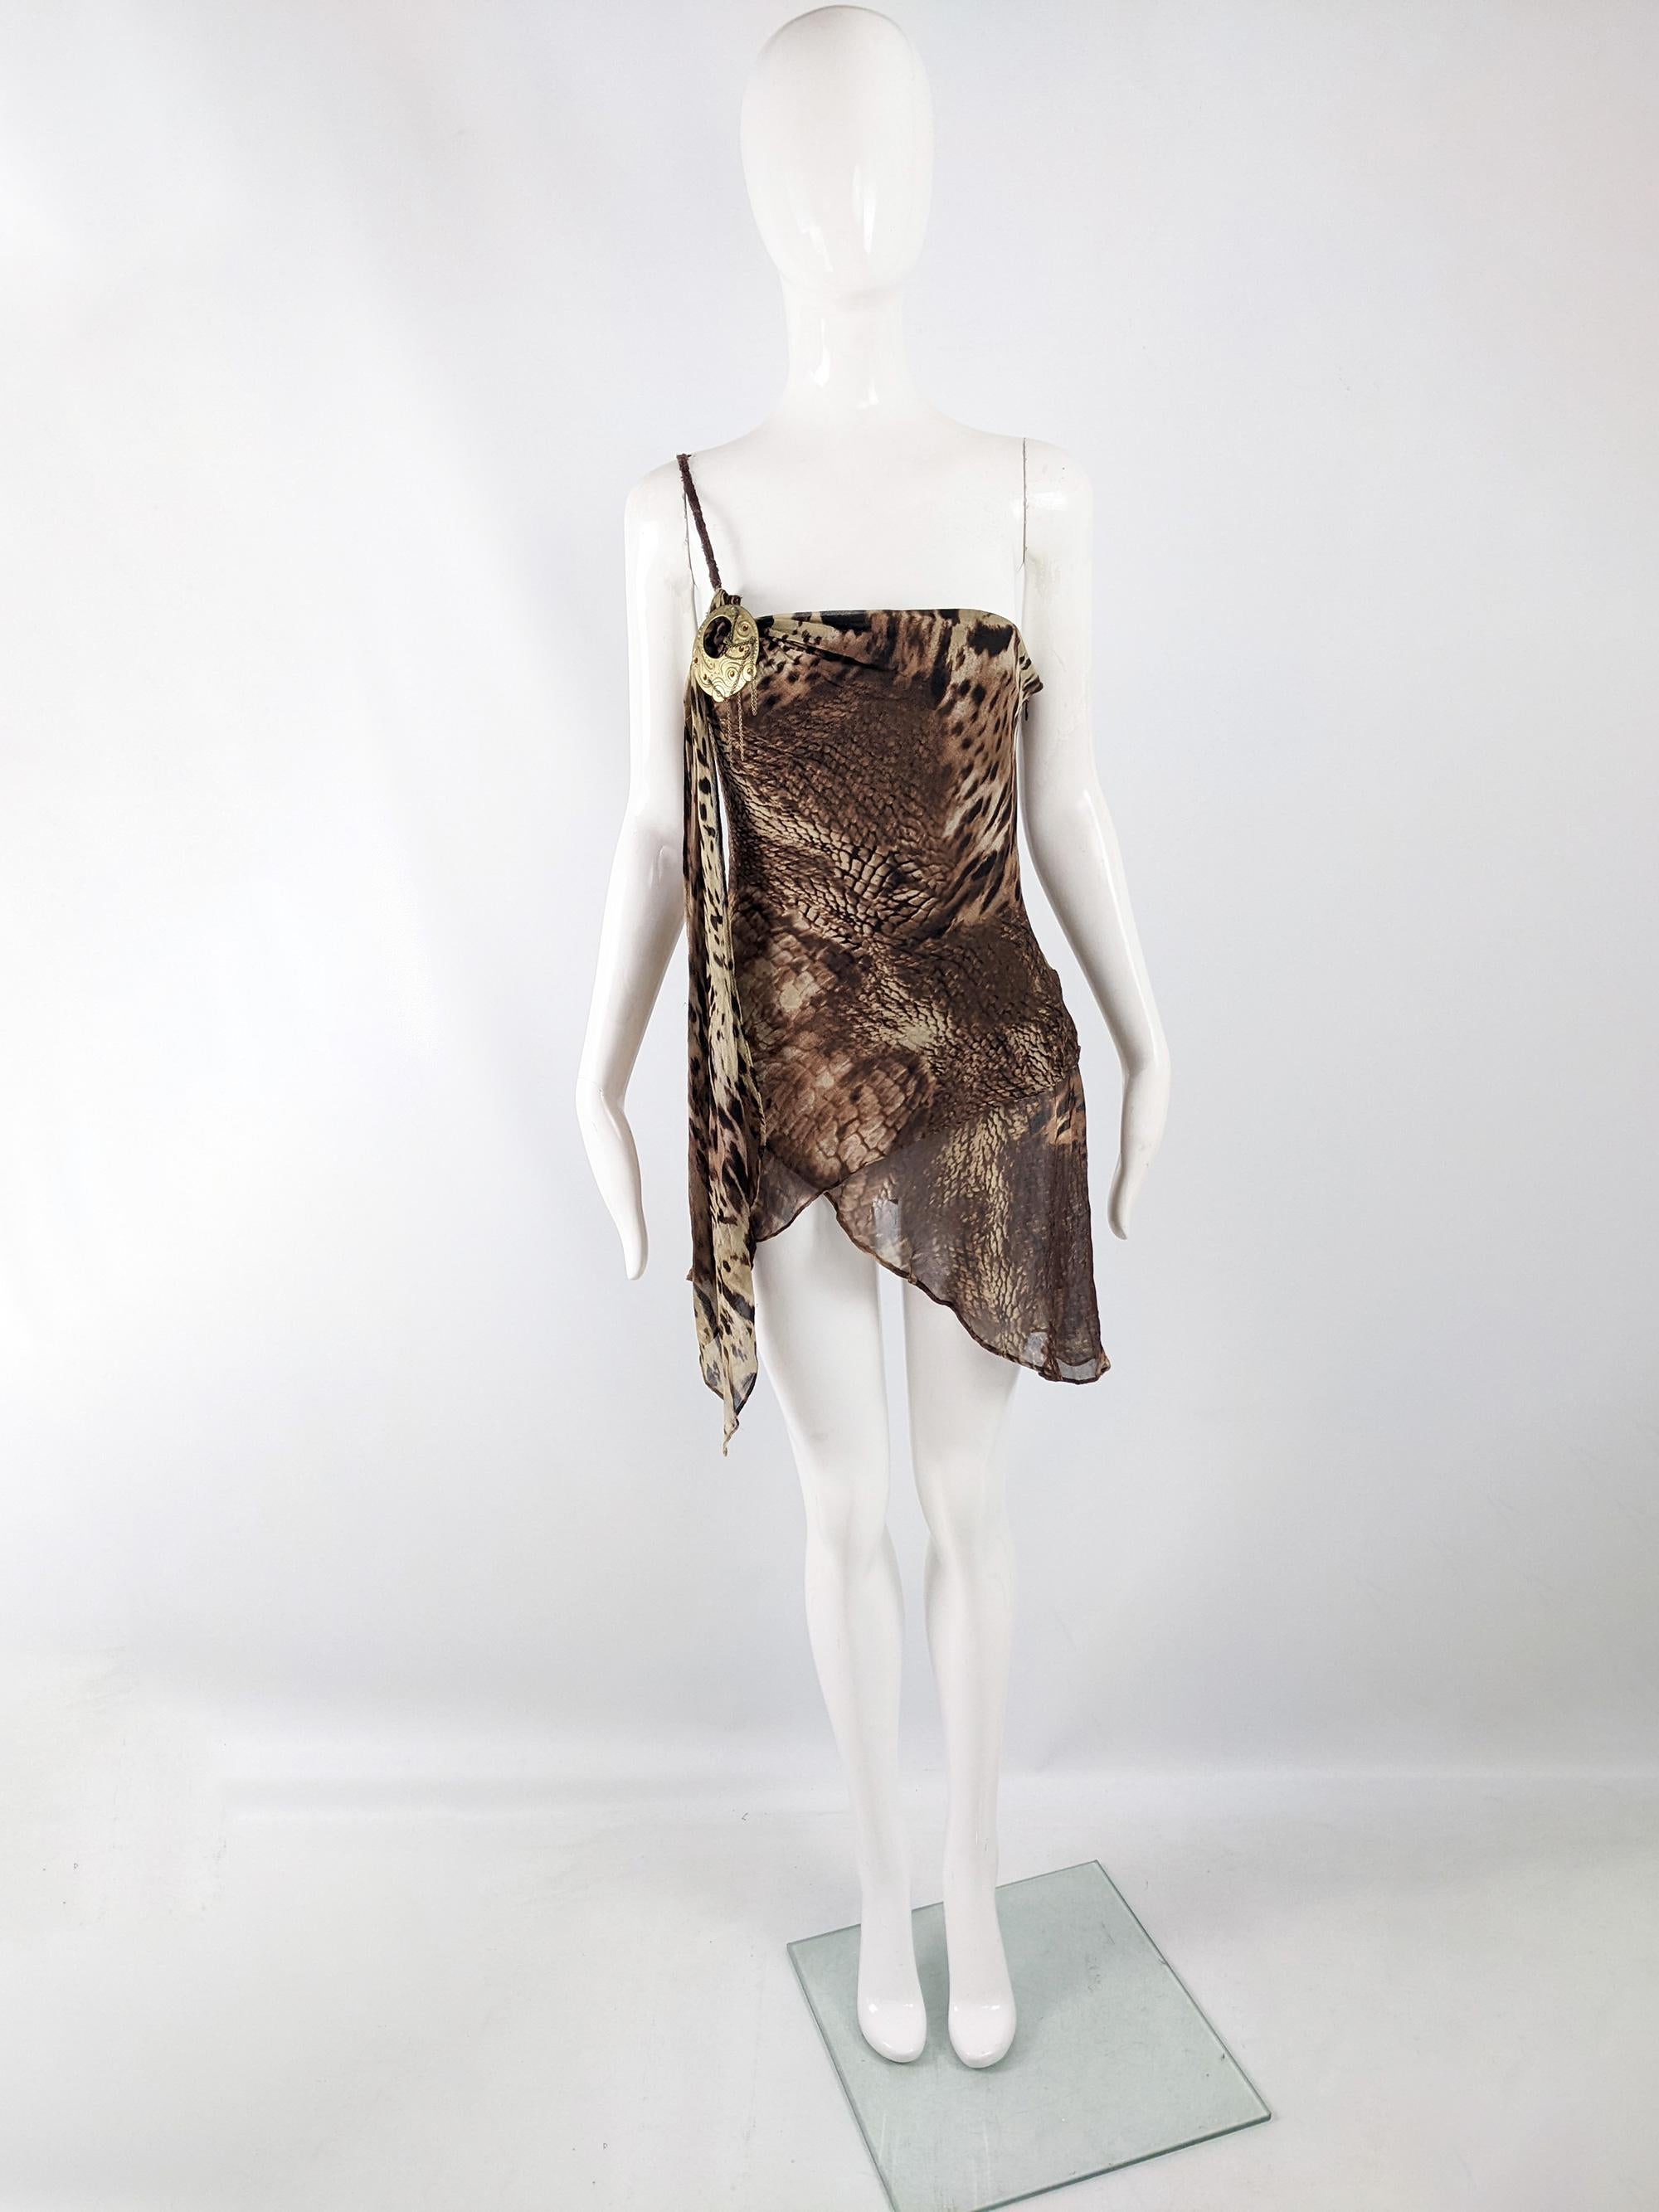 An incredible vintage y2k top from the early 2000s by luxury French designer, Orna Farho of Paris. In a brown floaty, bias cut silk chiffon with animal prints throughout. It has an asymmetrical design with one shoulder and a large clasp detail